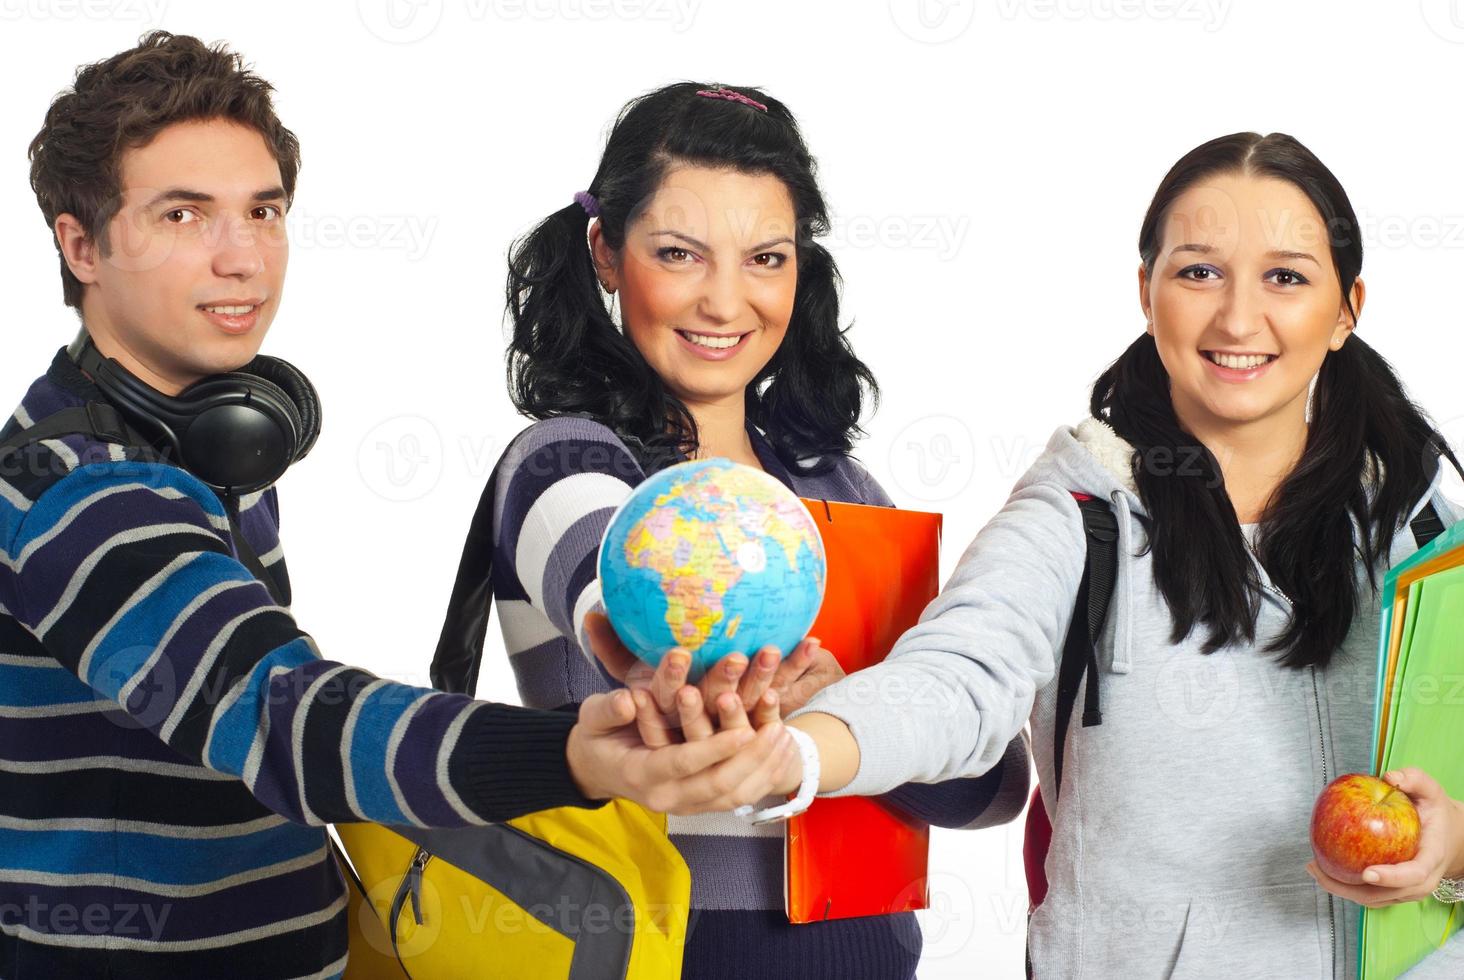 Students with hands together holding globe photo